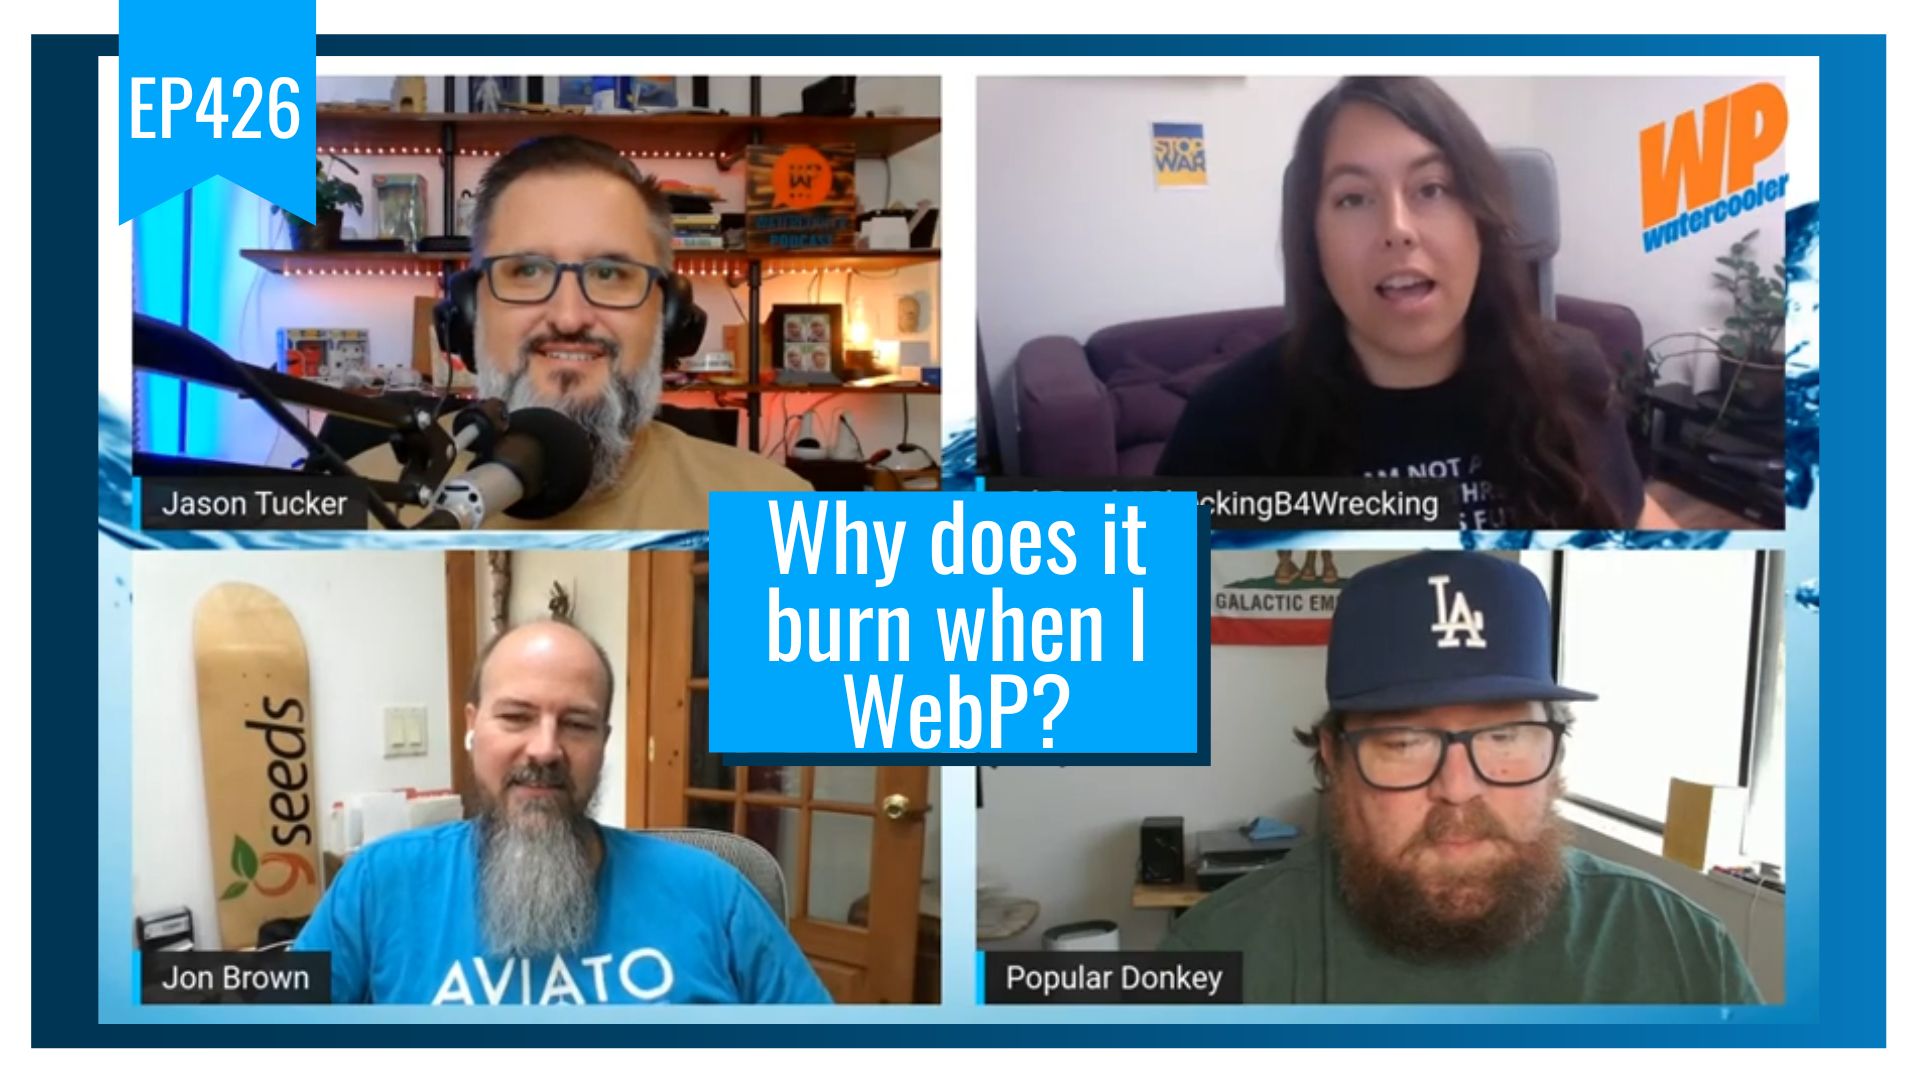 EP426 – Why does it burn when I WebP?